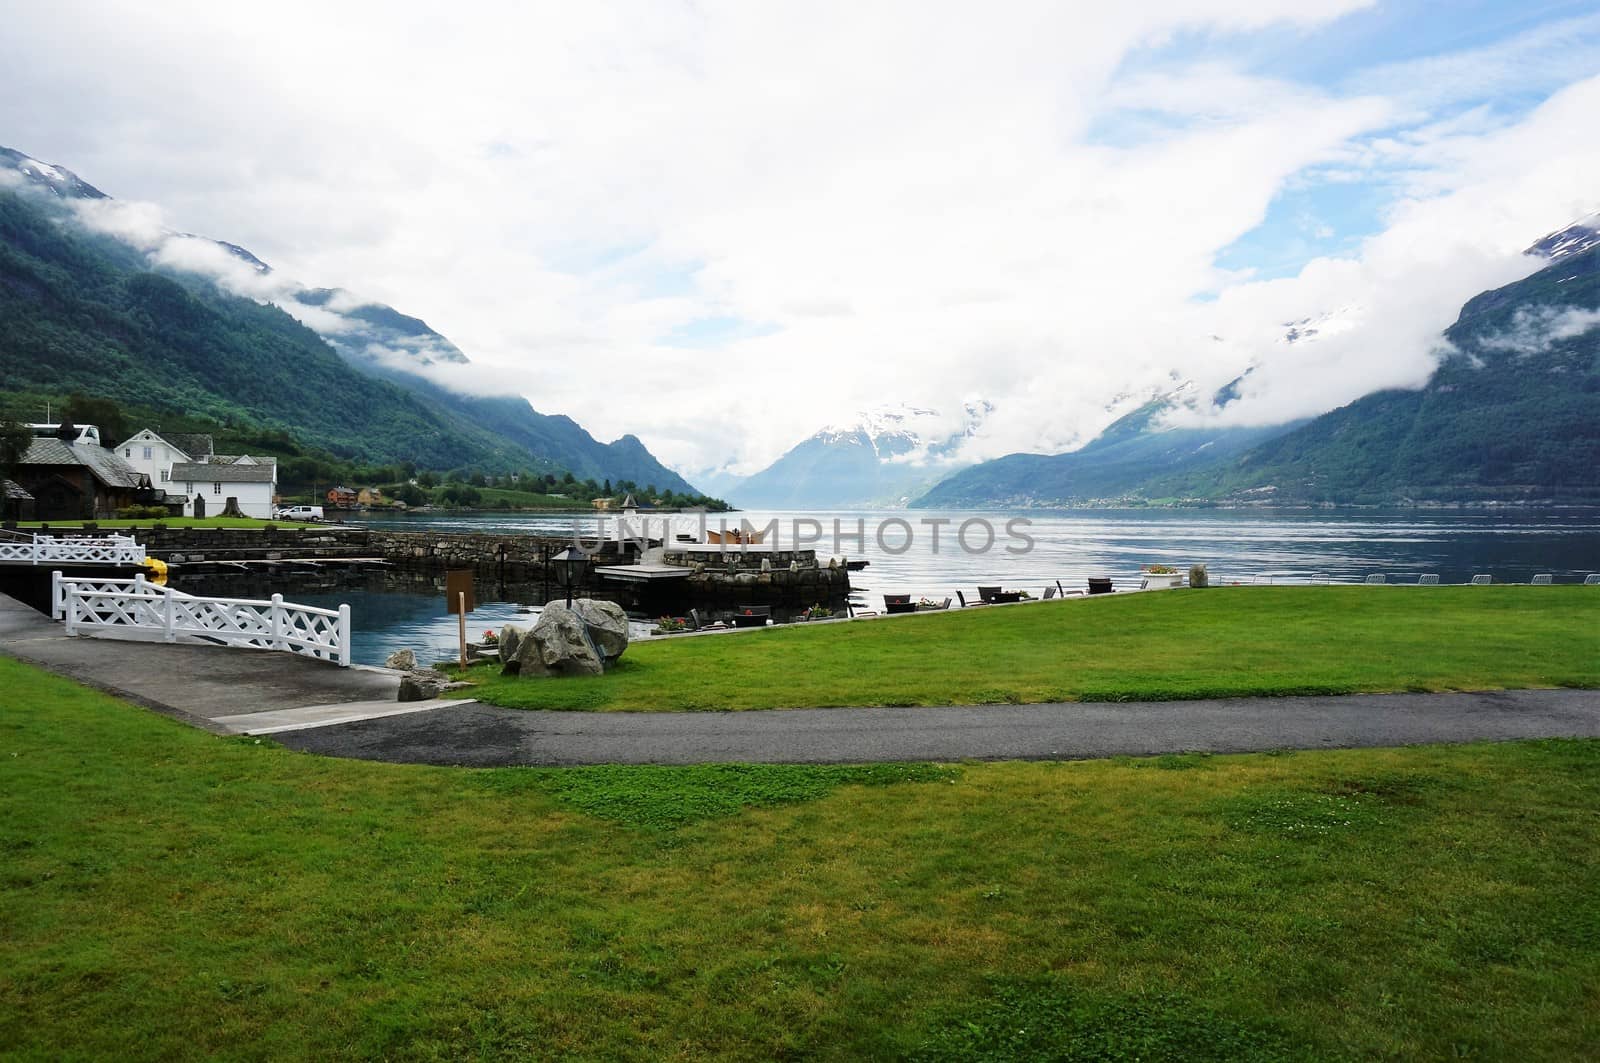 Lovely nature in Norway, Hardangerfjorden, water and mountains